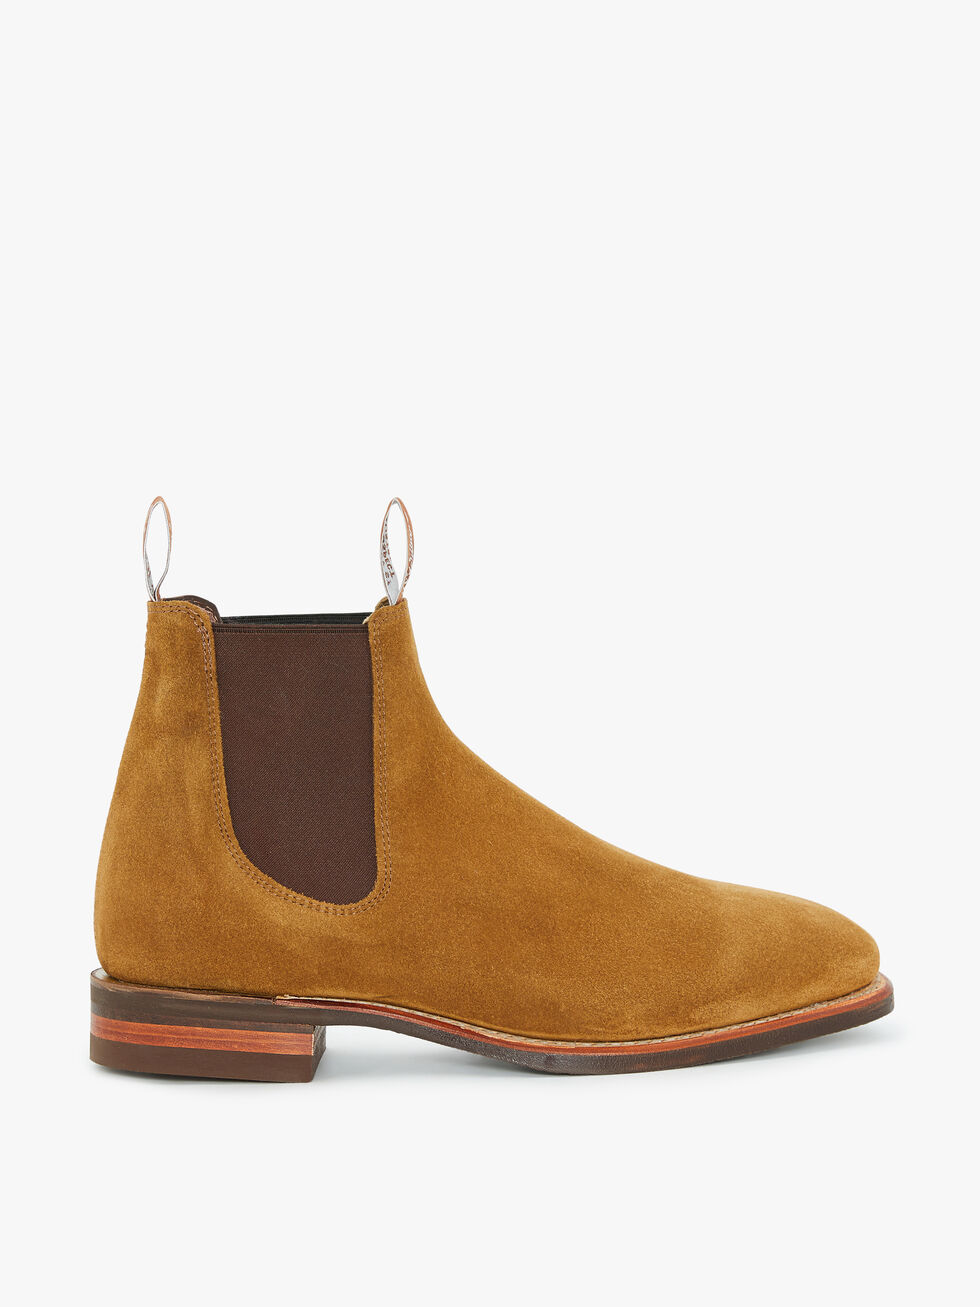 R.M Williams Boots in Tobacco Suede - The Ben Silver Collection